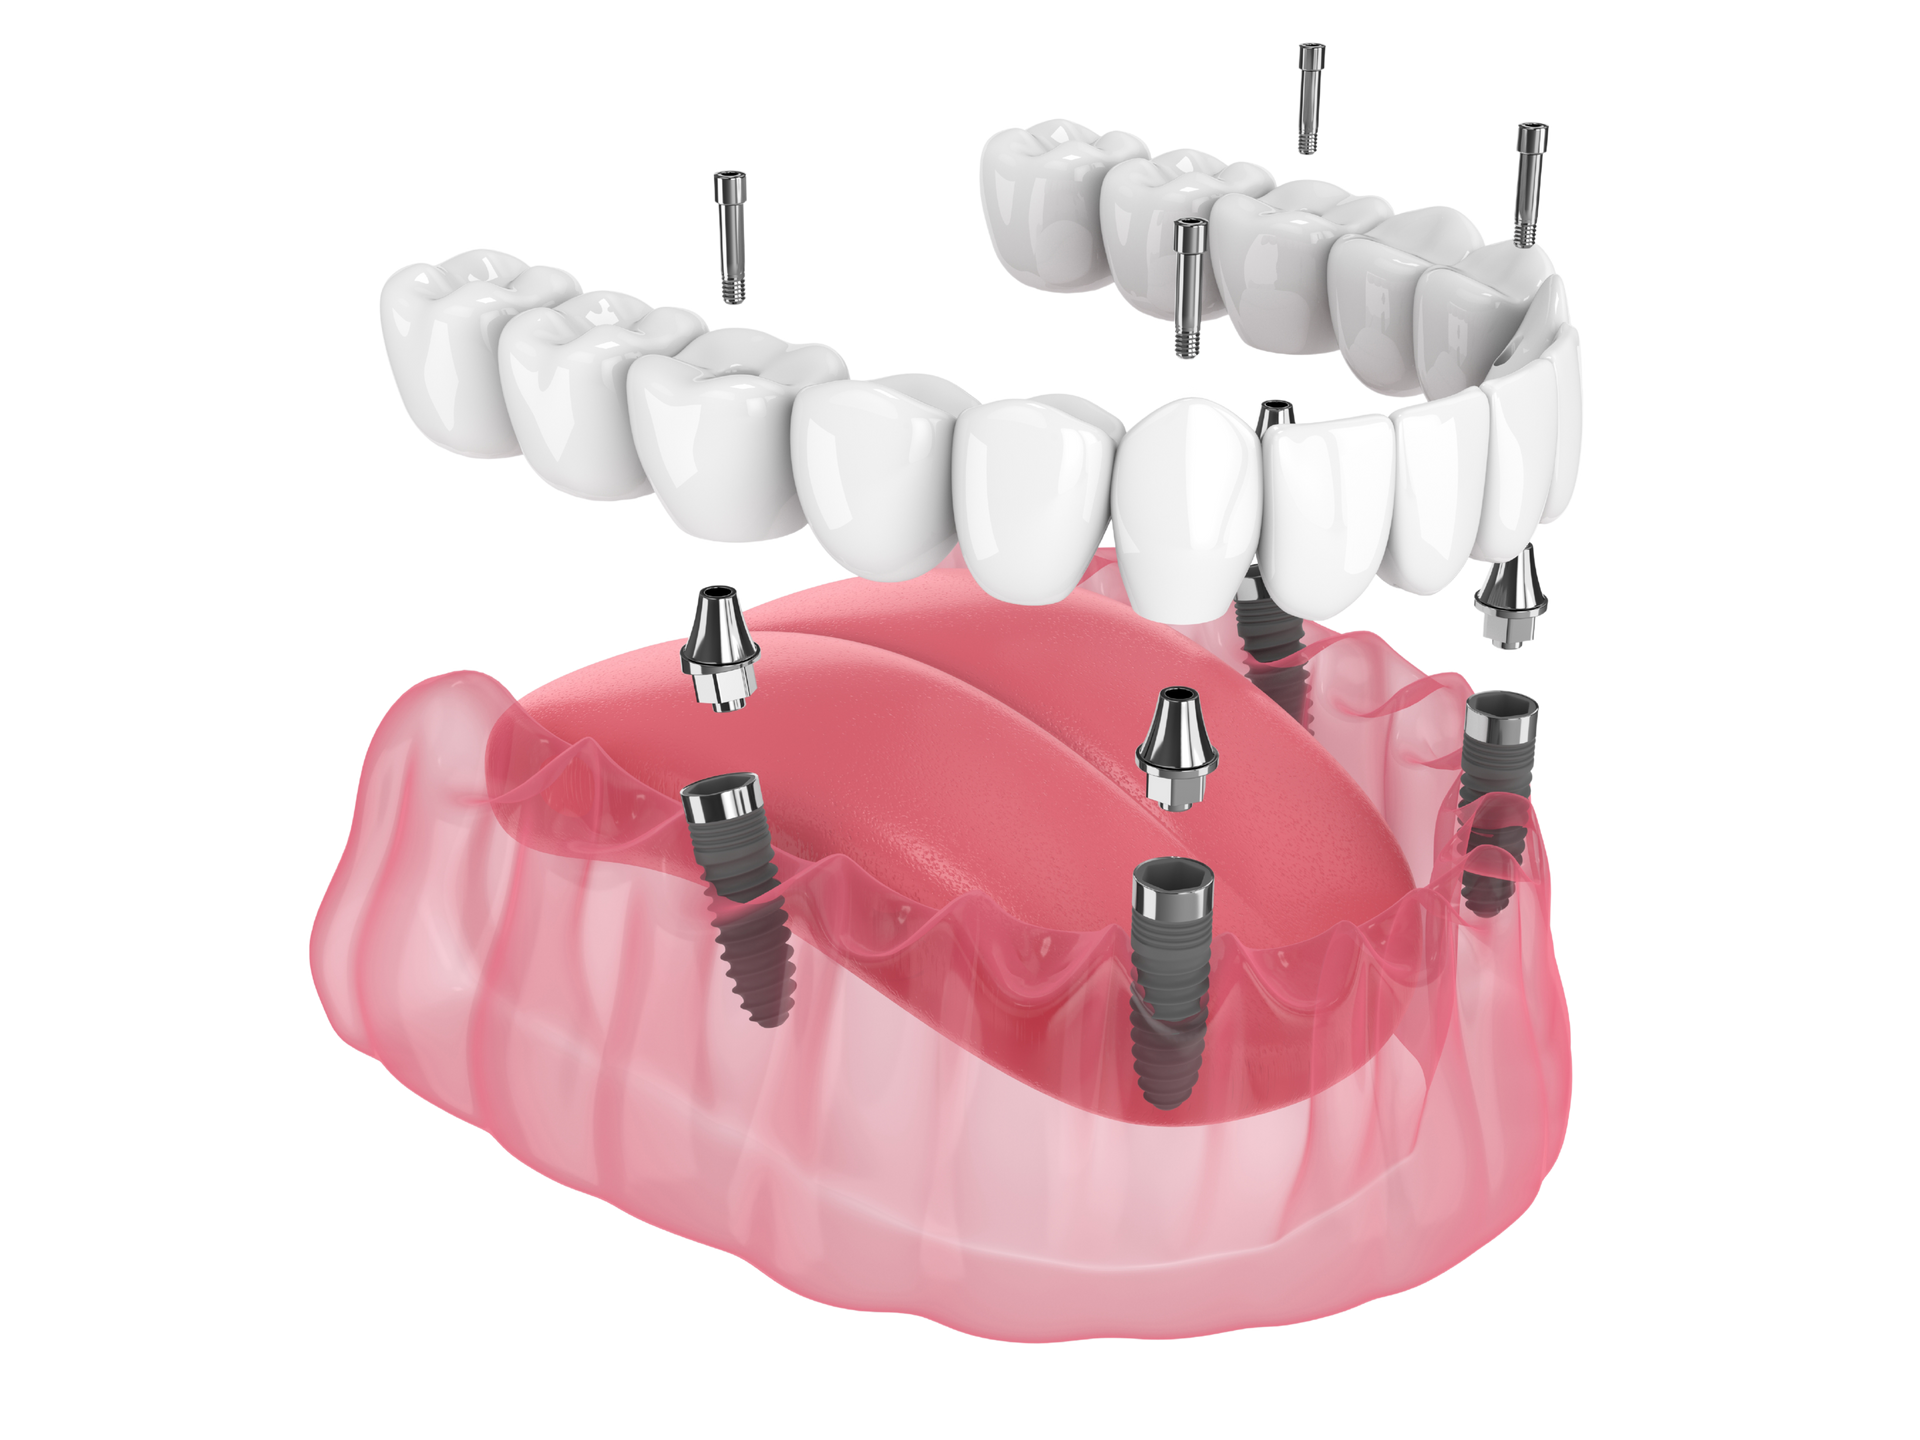 a model of a full denture with dental implants .